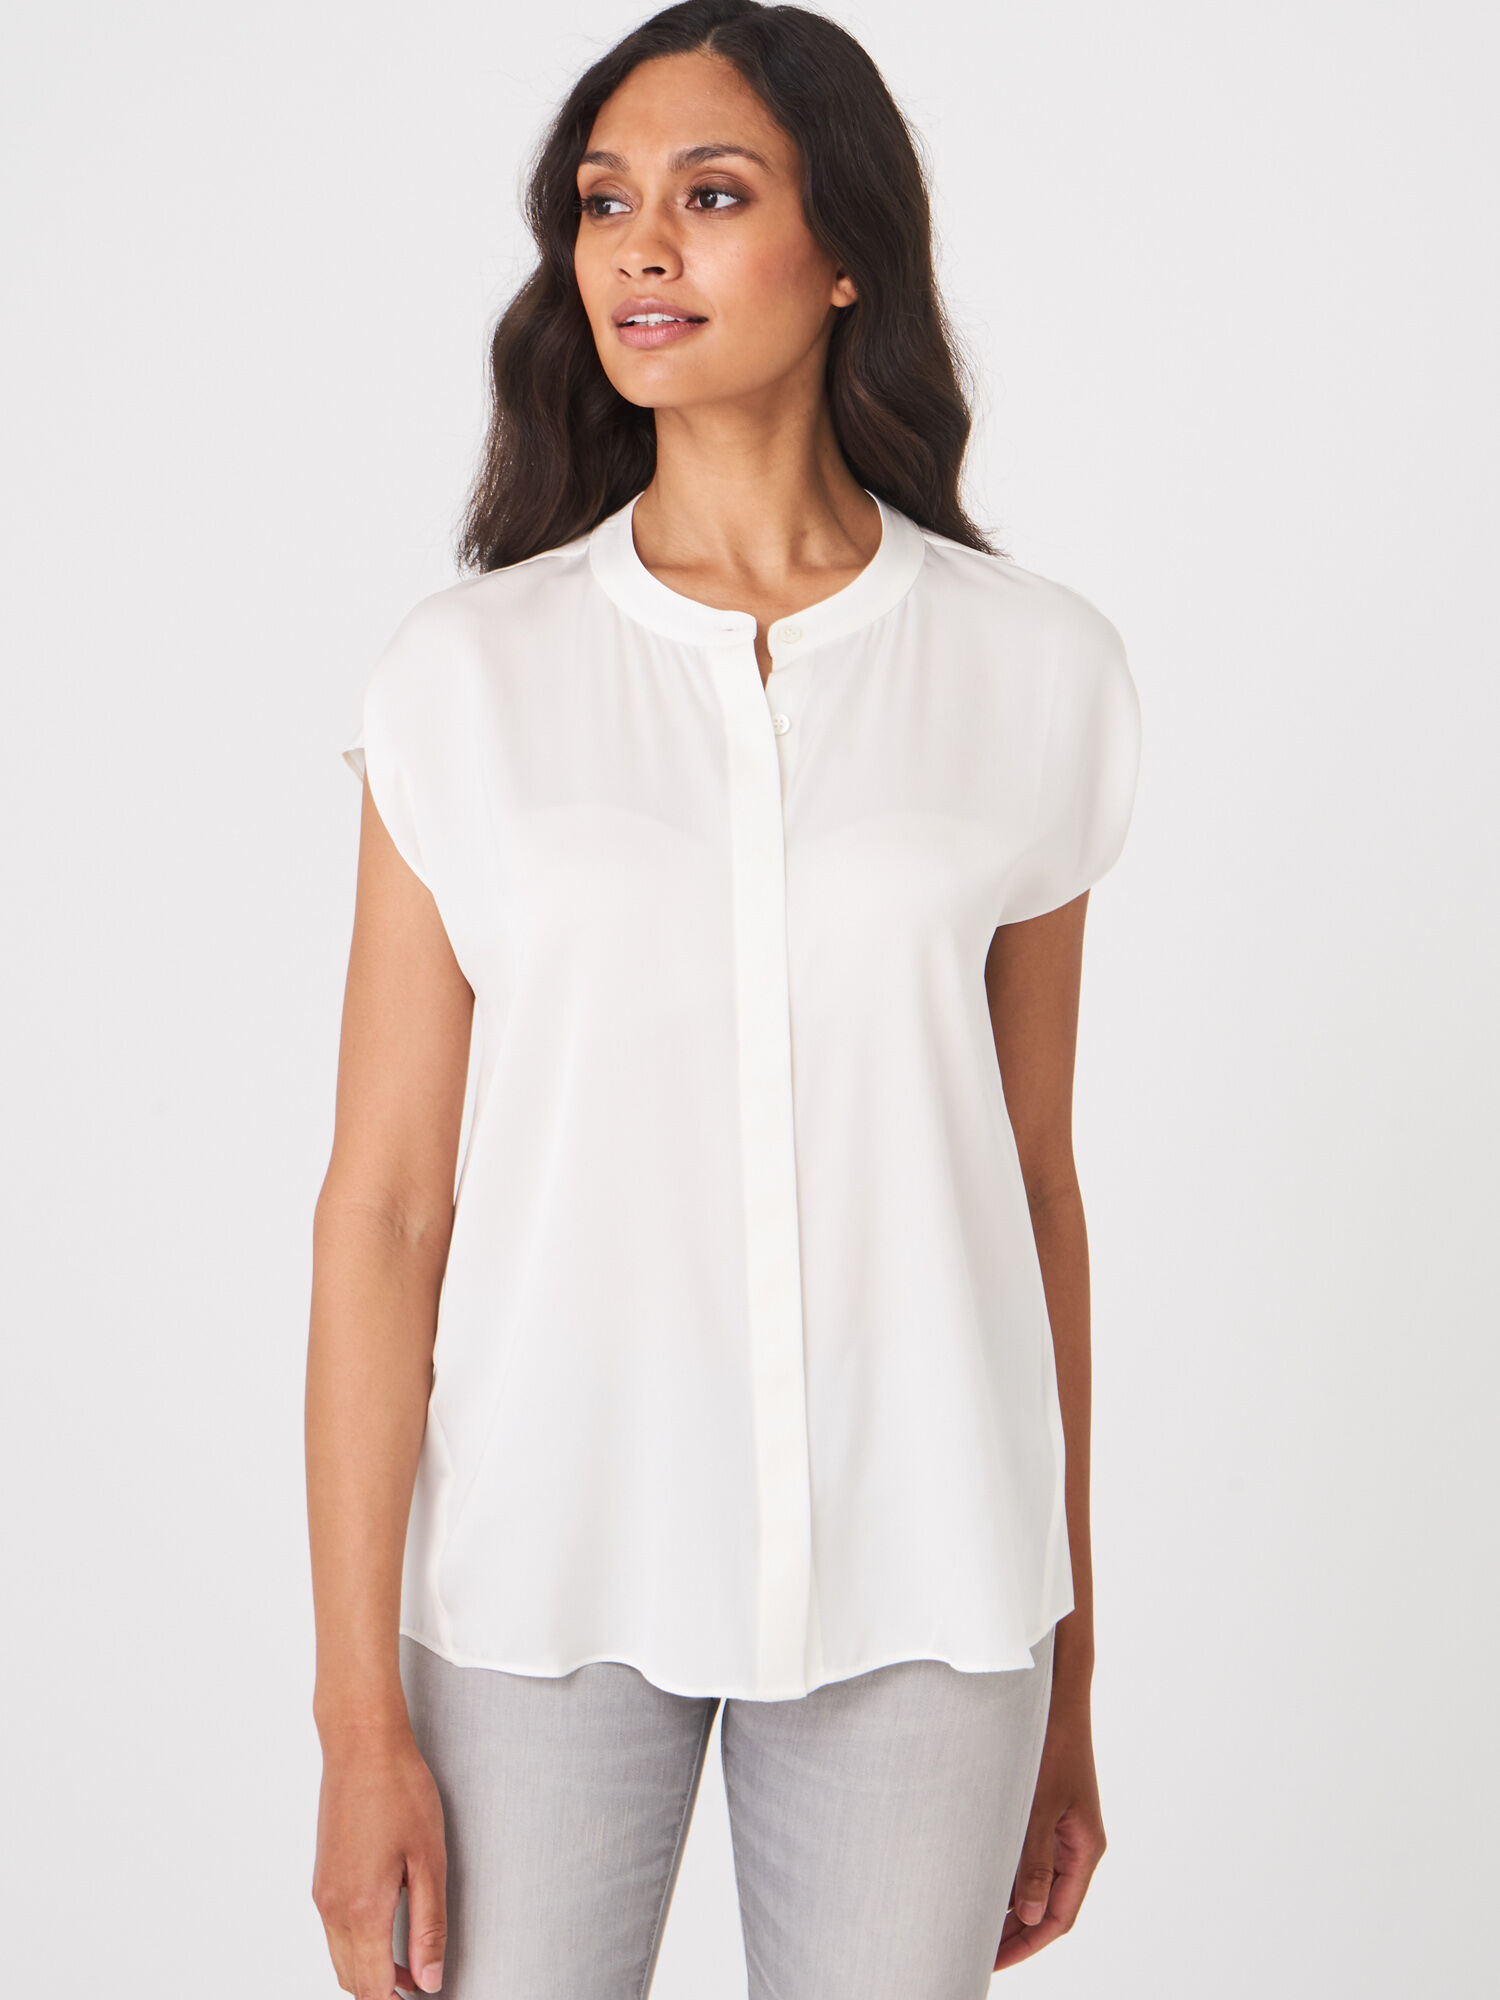 Blouse top with concealed button placket